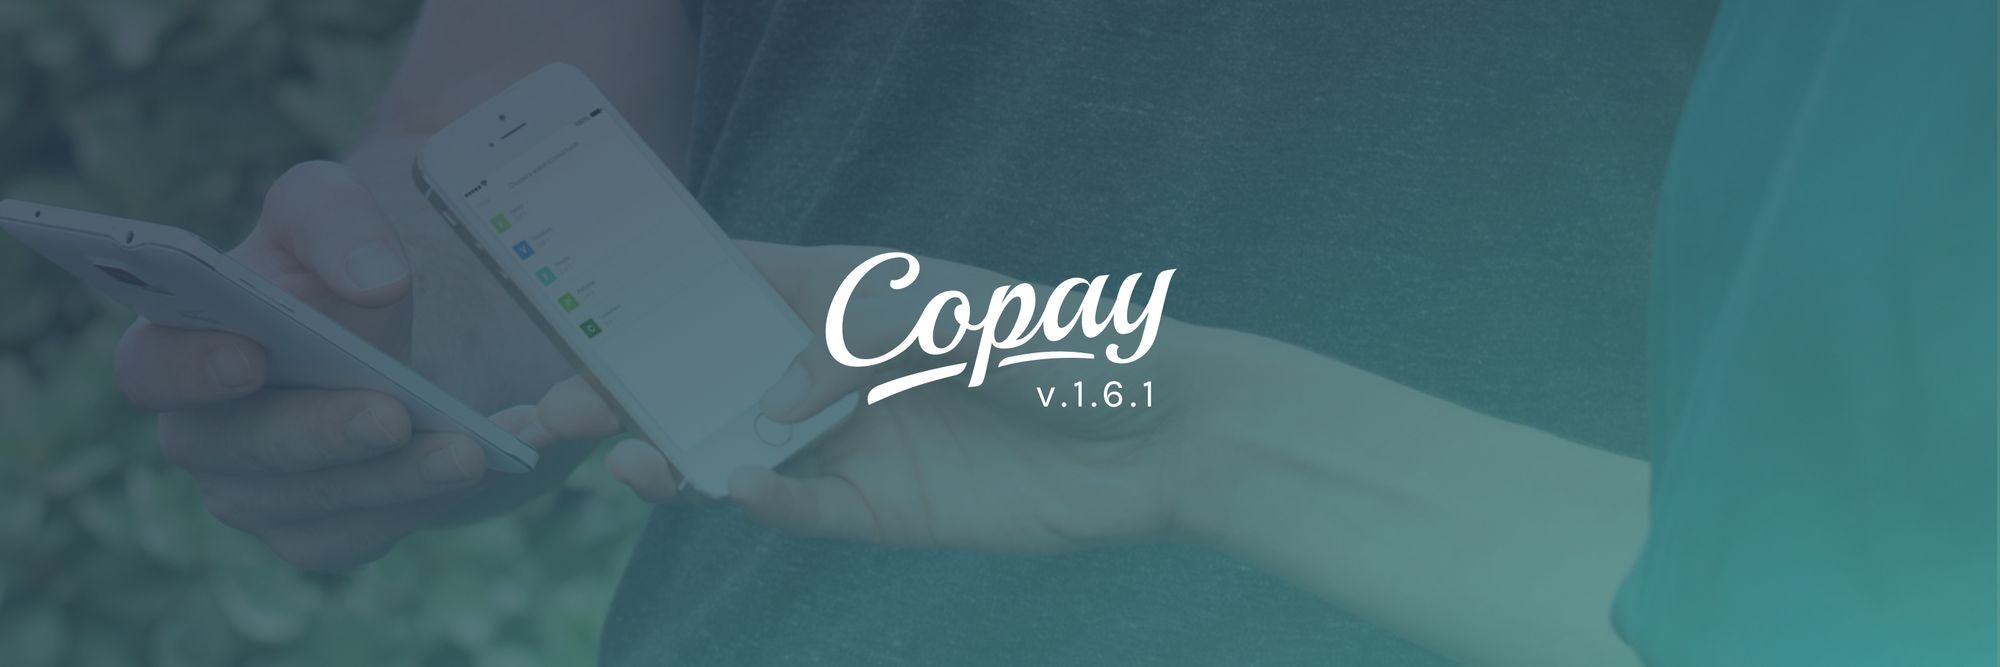 Better Backup Verification and a New Wallet Look in Copay 1.6.1